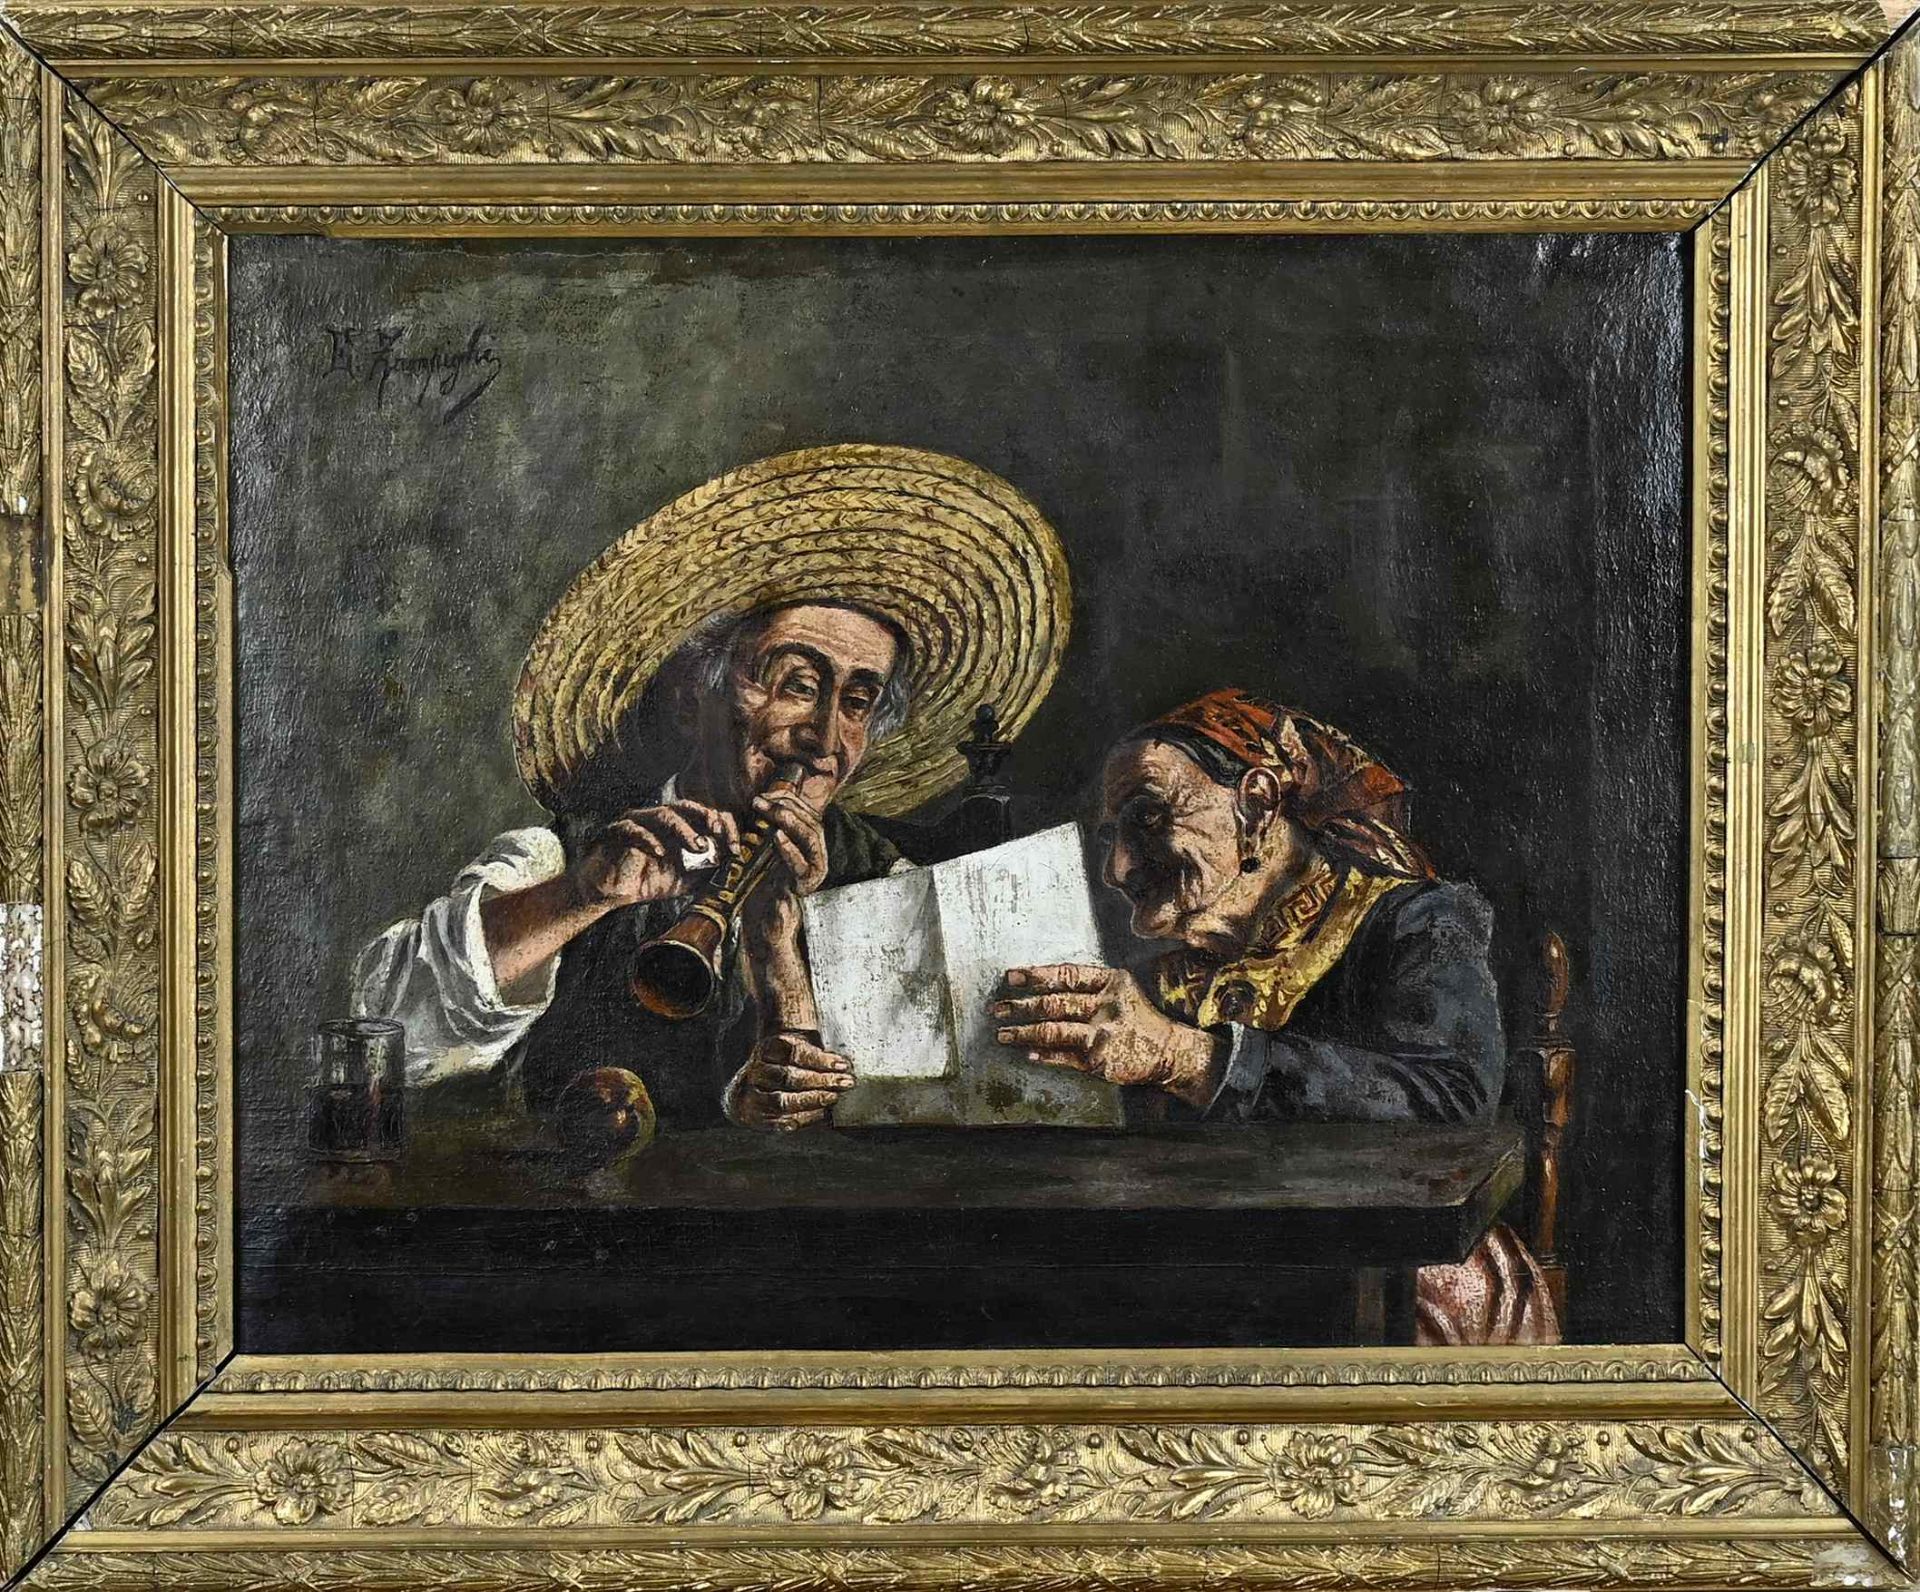 Eugenio Zampighi, Music-making South Tyrolean older couple